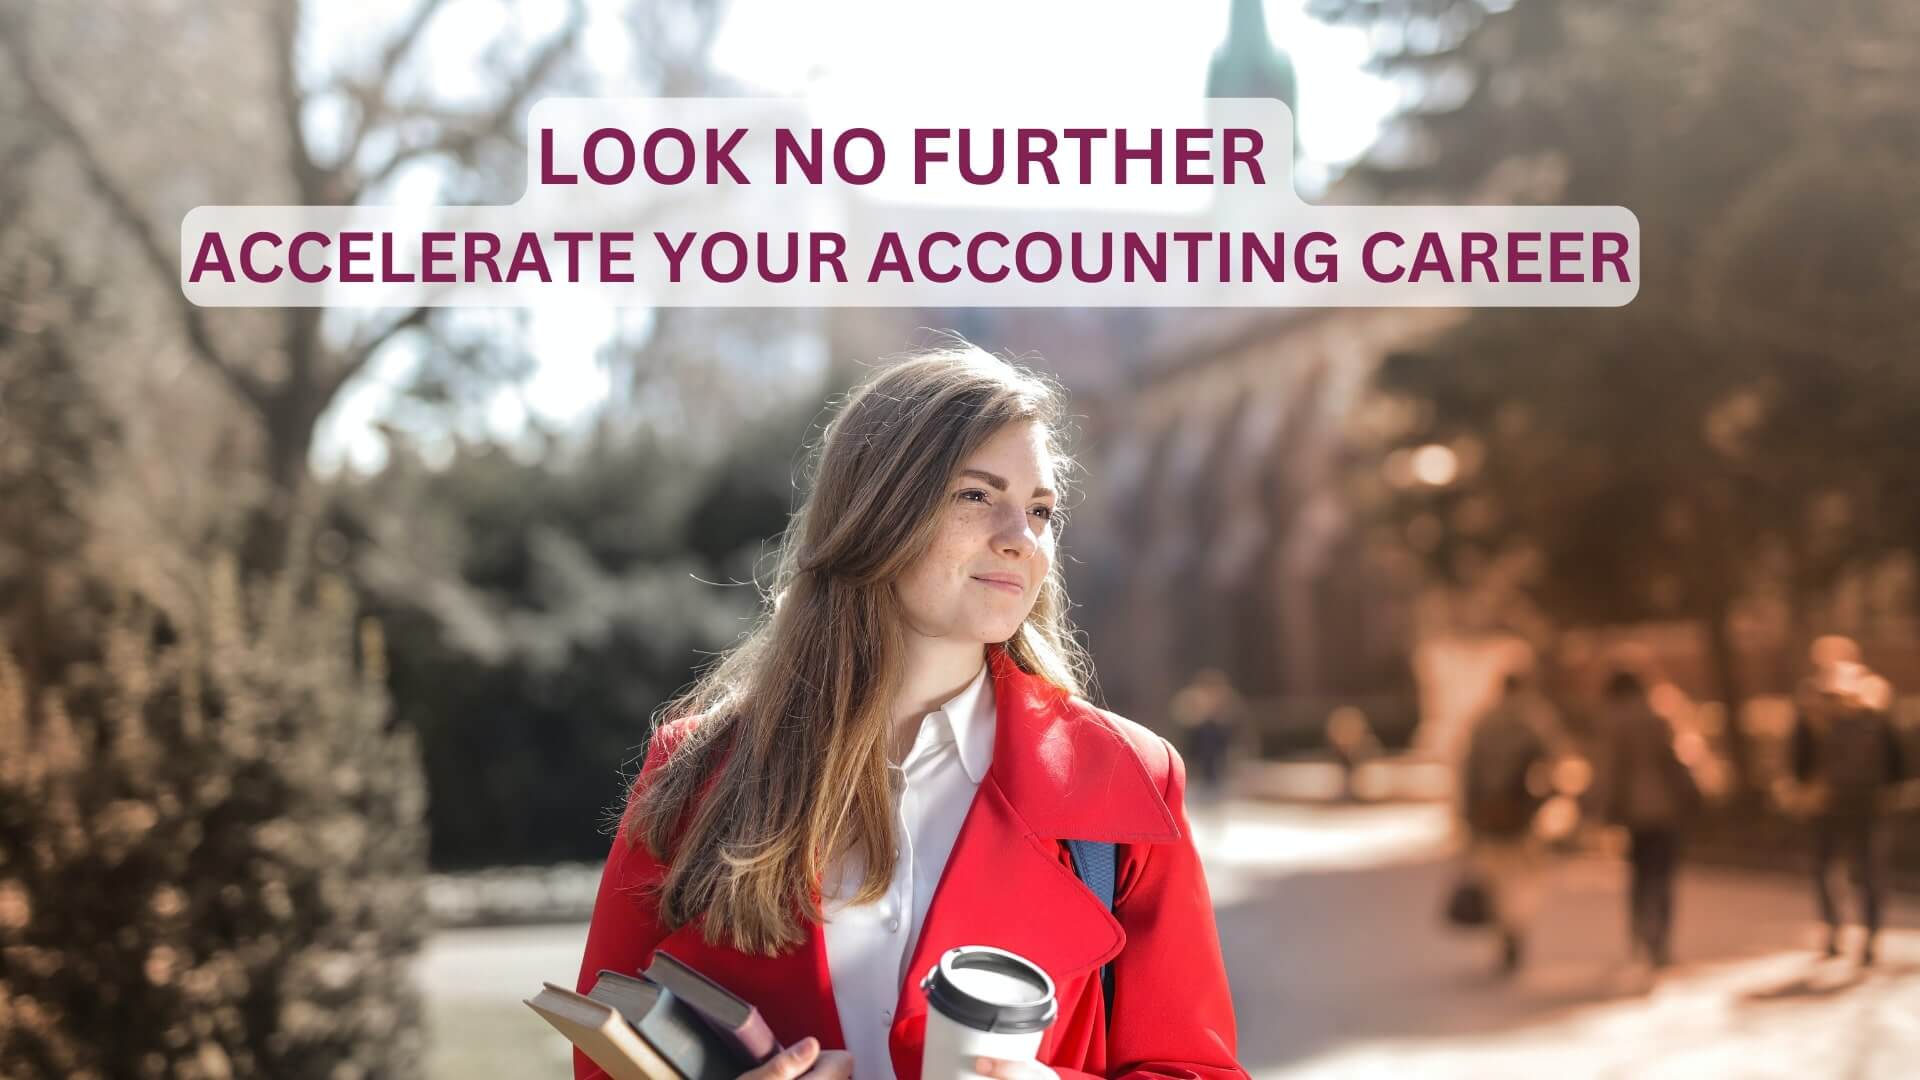 Accelerate your accounting carrer